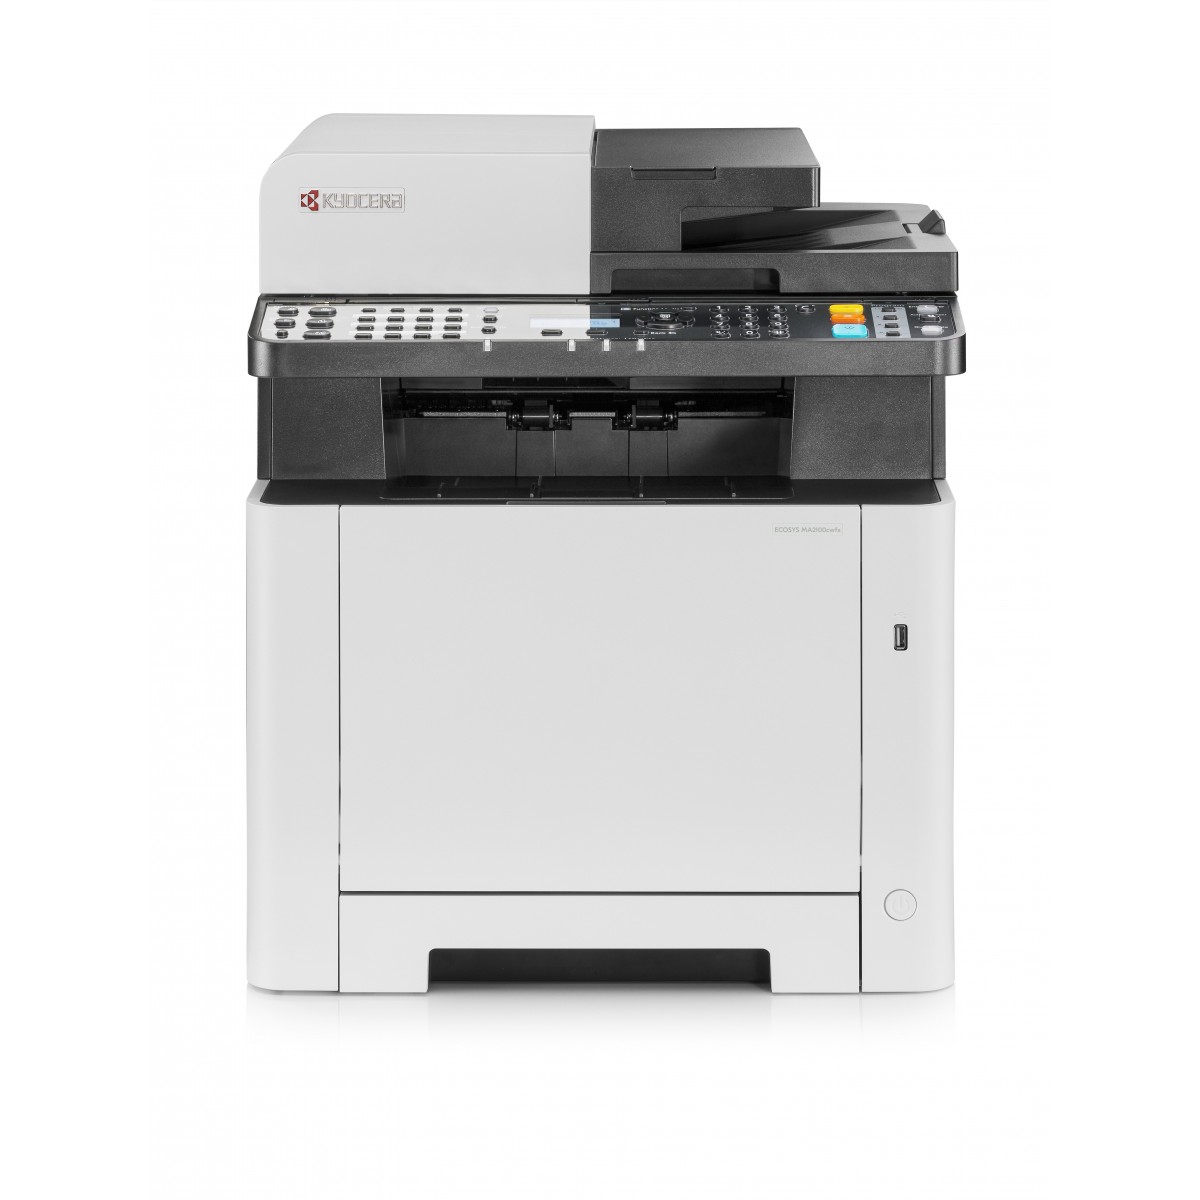 Kyocera ECOSYS MA2100CWFX/KL3 - Colored